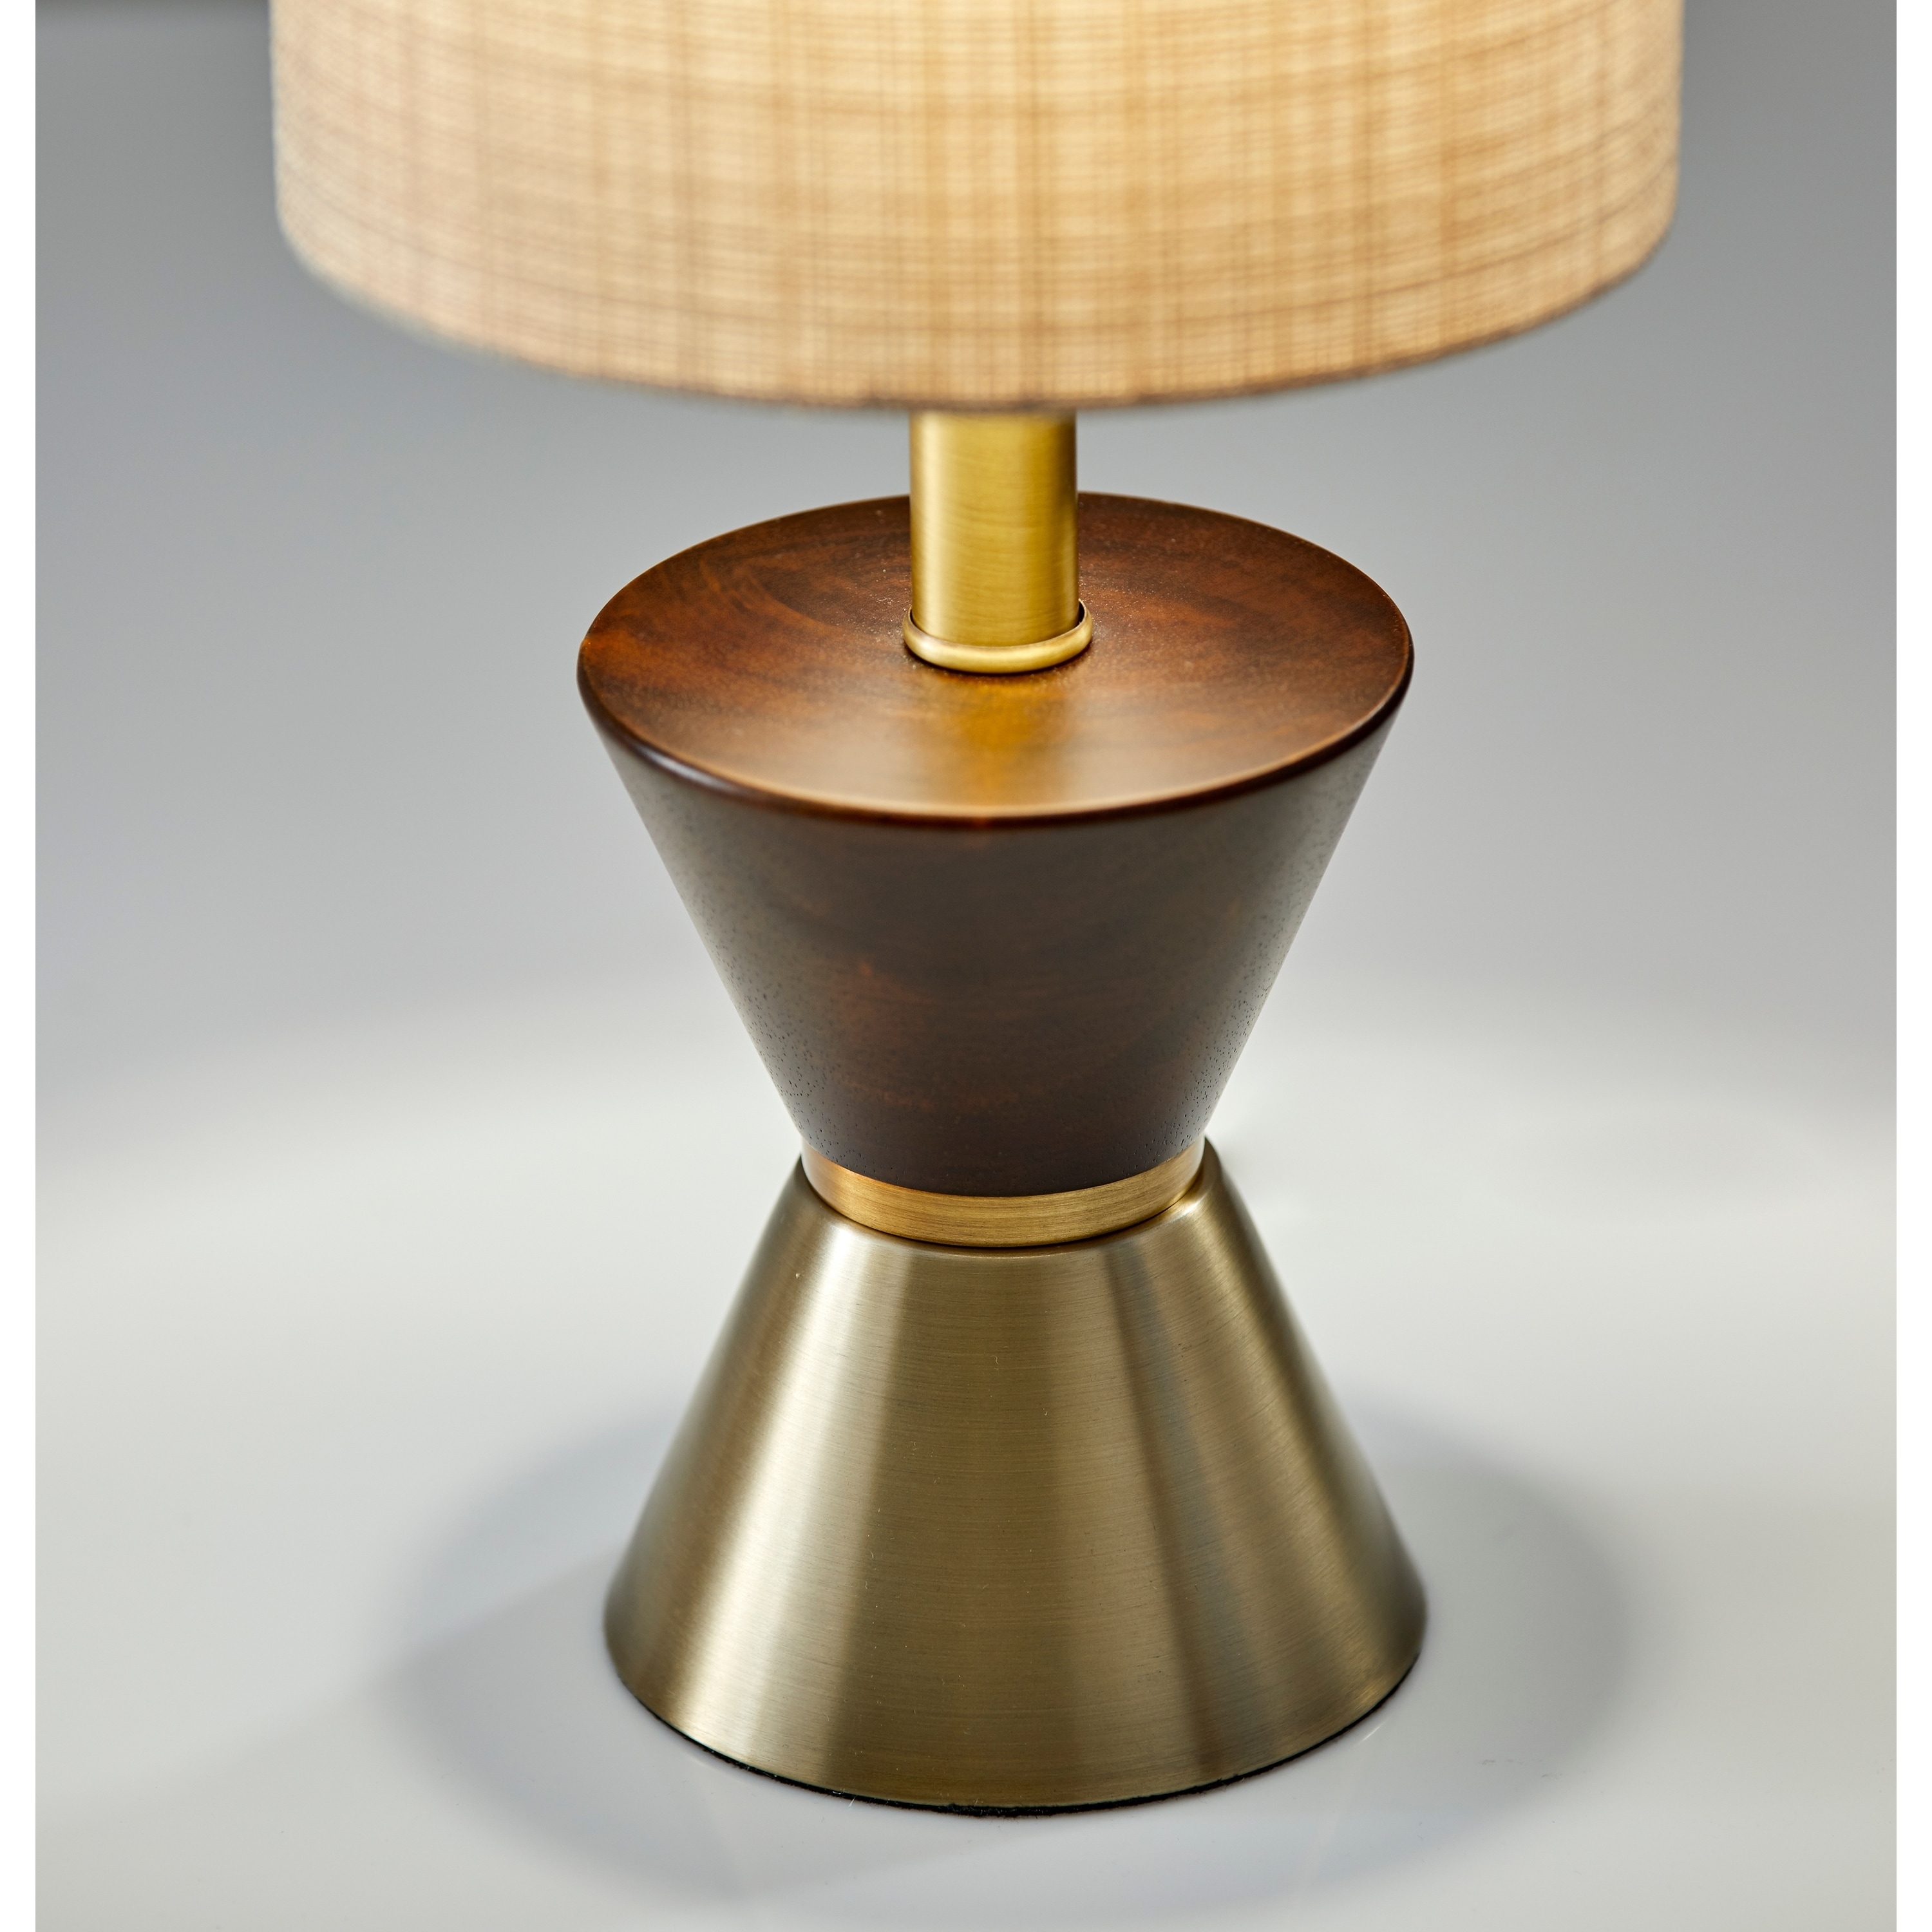 adesso antique brass and walnut rubberwood carmen table lamp metal accent free shipping today danish dining living room design round kitchen chairs outdoor bar stools bunnings